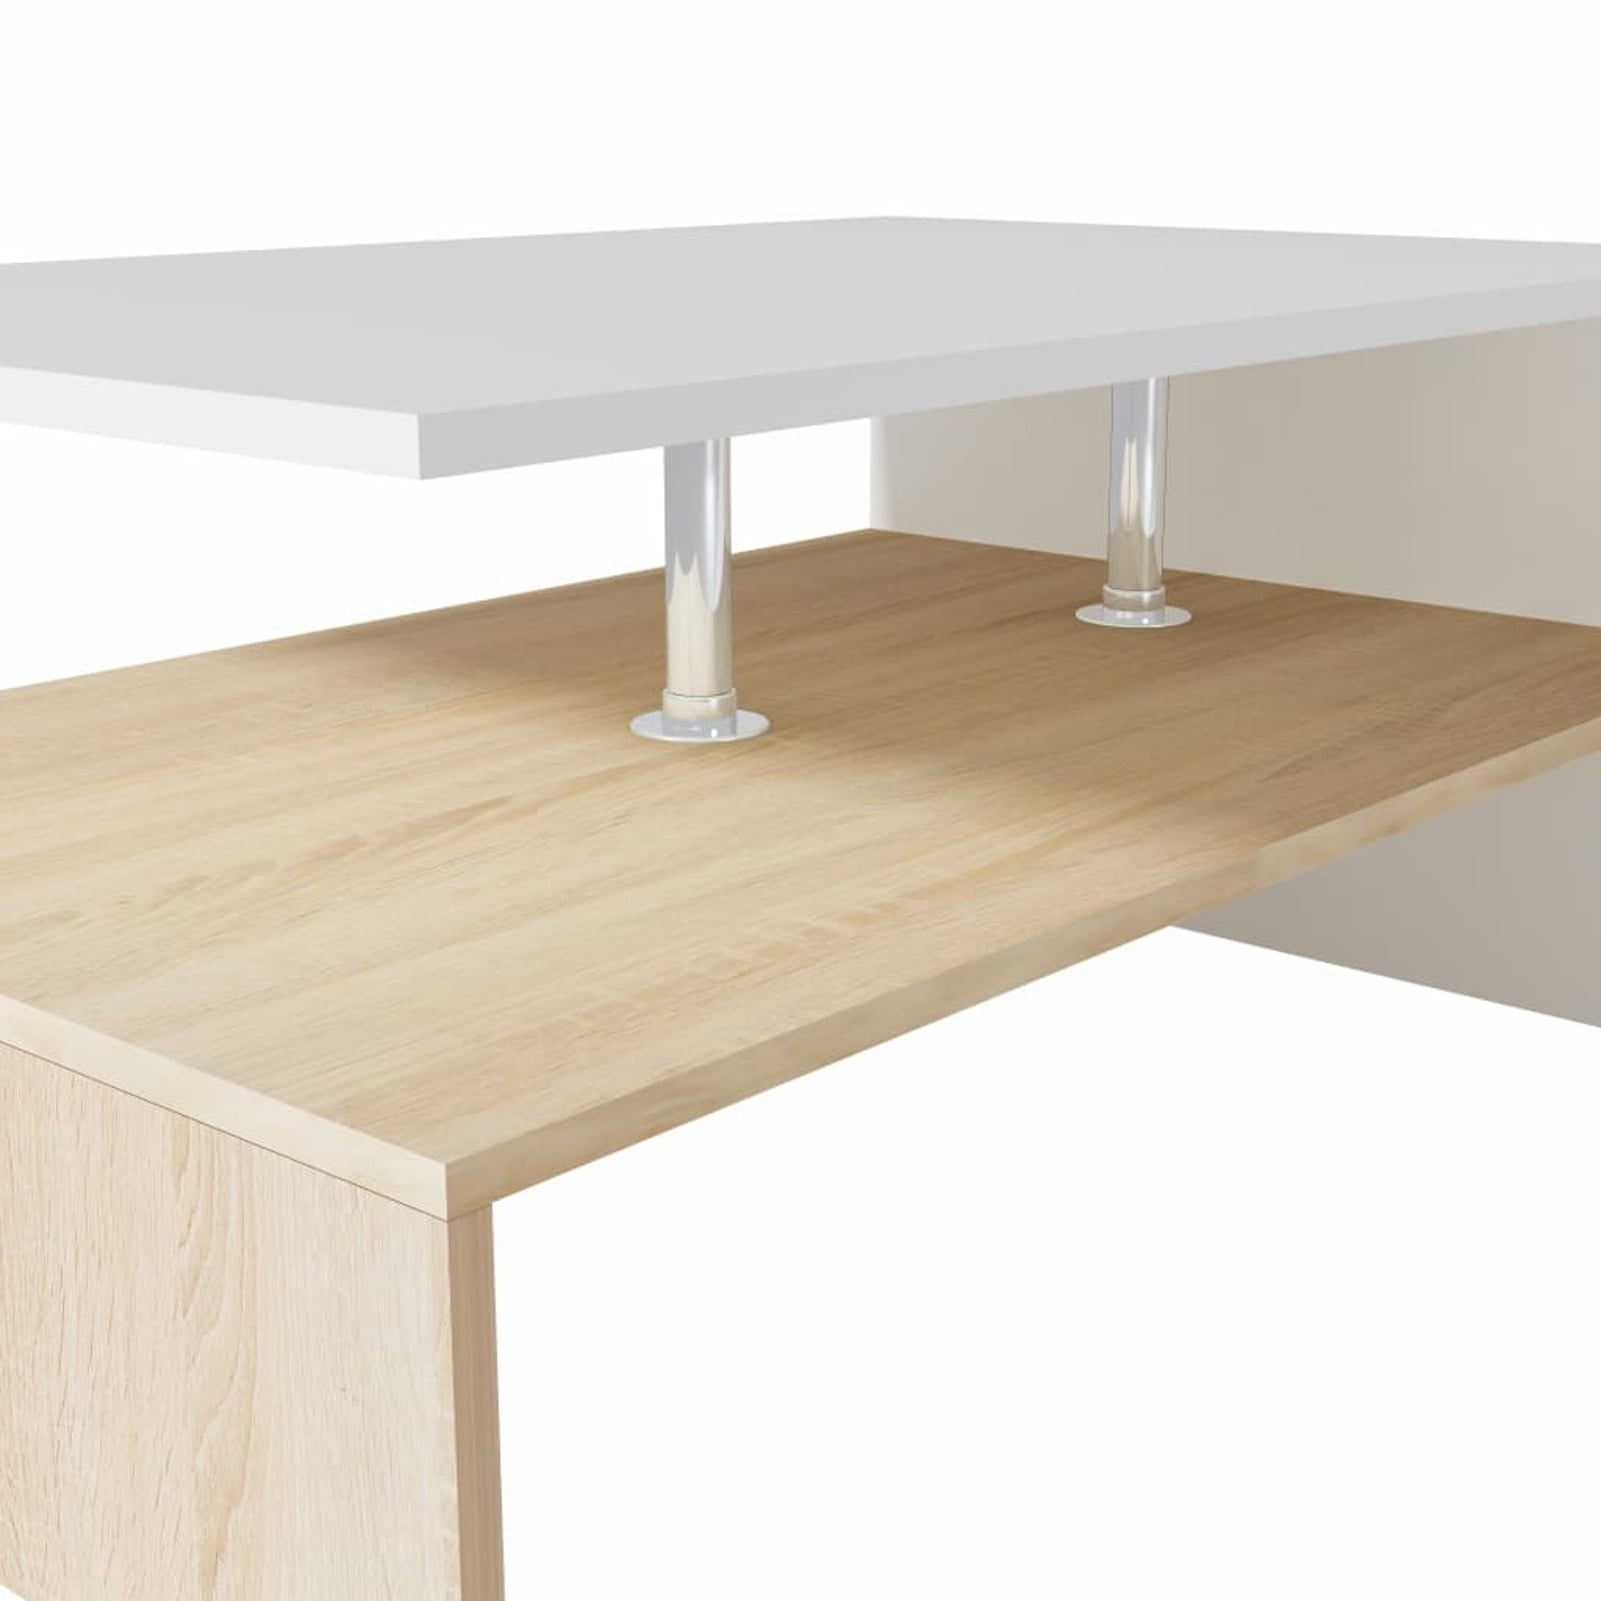 Details about   Coffee Table Chipboard 35.4"x23.2"x16.5" Oak and White PVC edges stable durable 